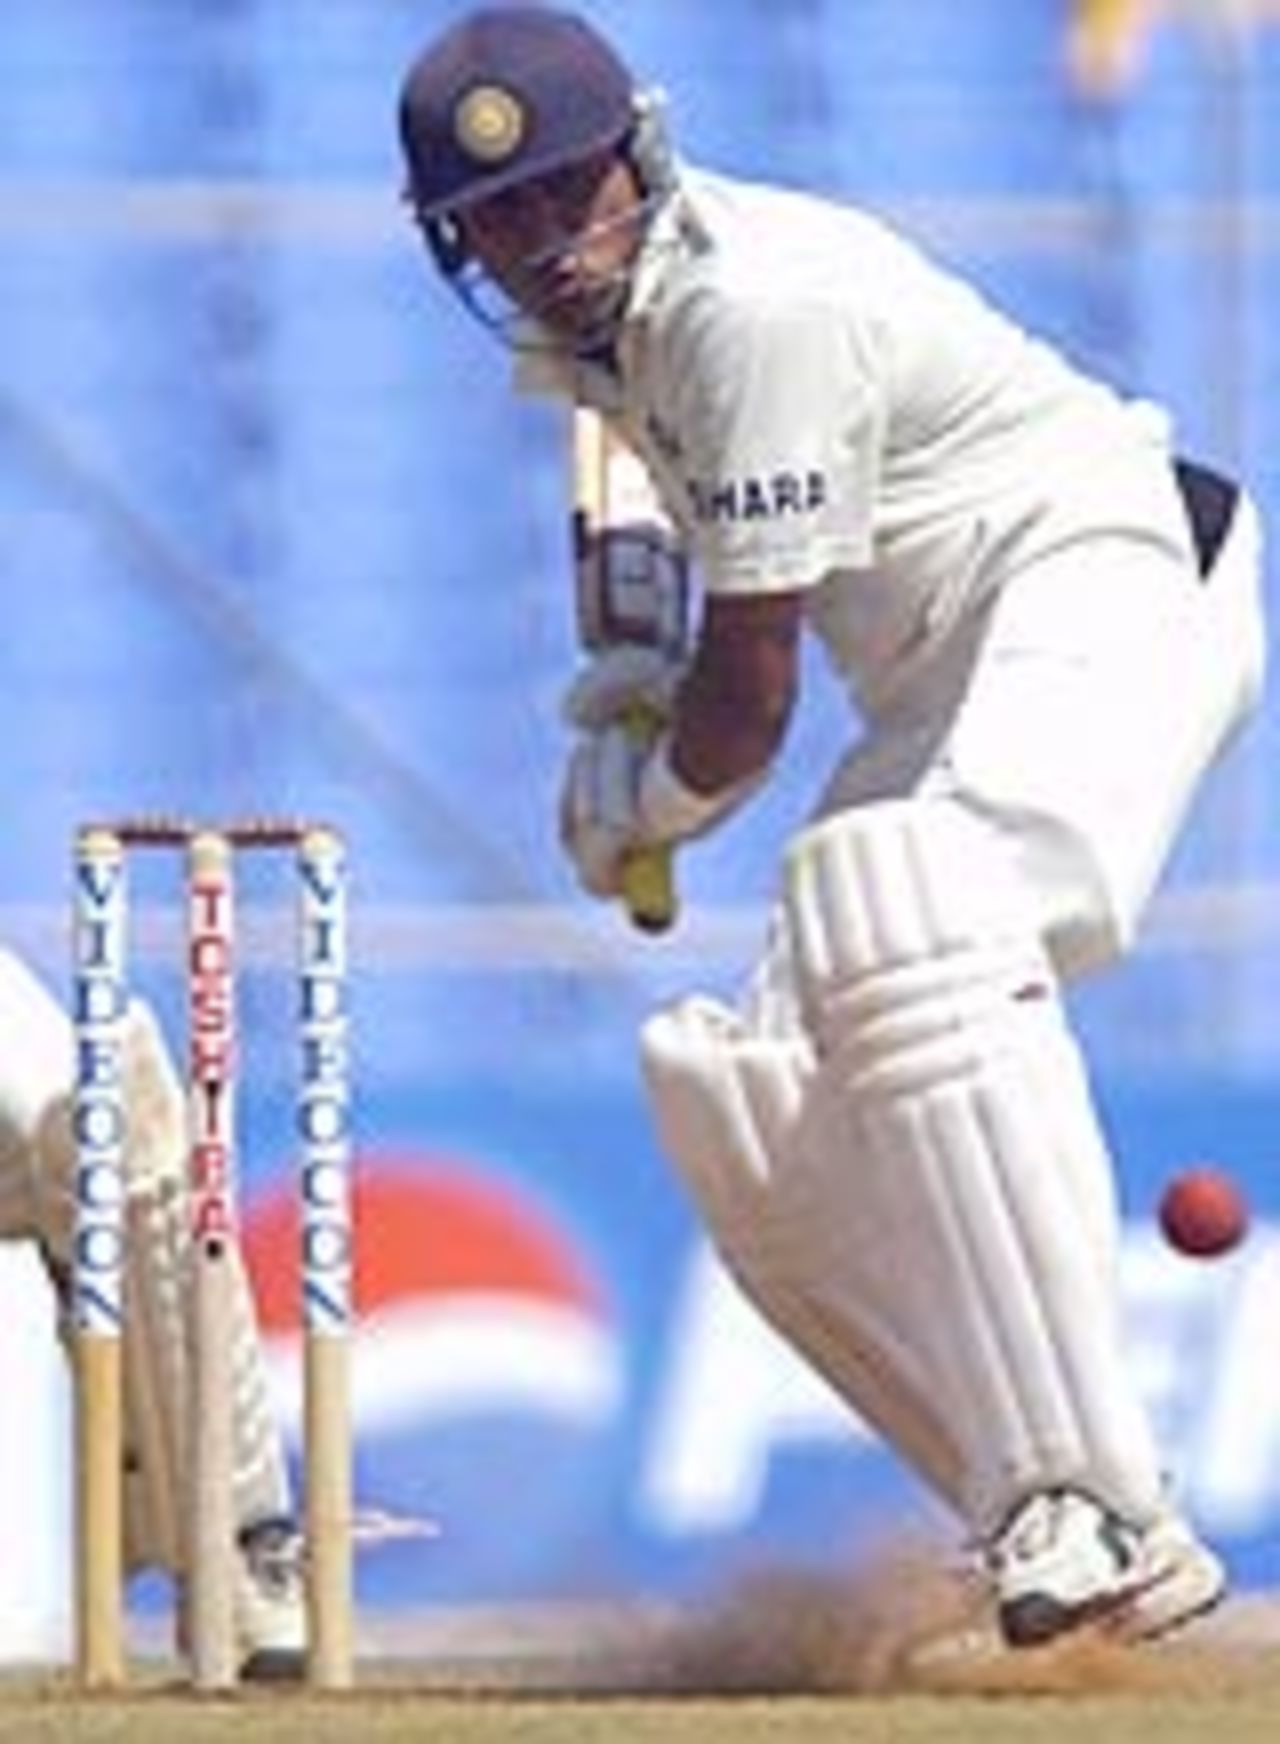 Aakash Chopra in action against New Zealand in the first day of the first Test at Ahmedabad, October 8, 2003